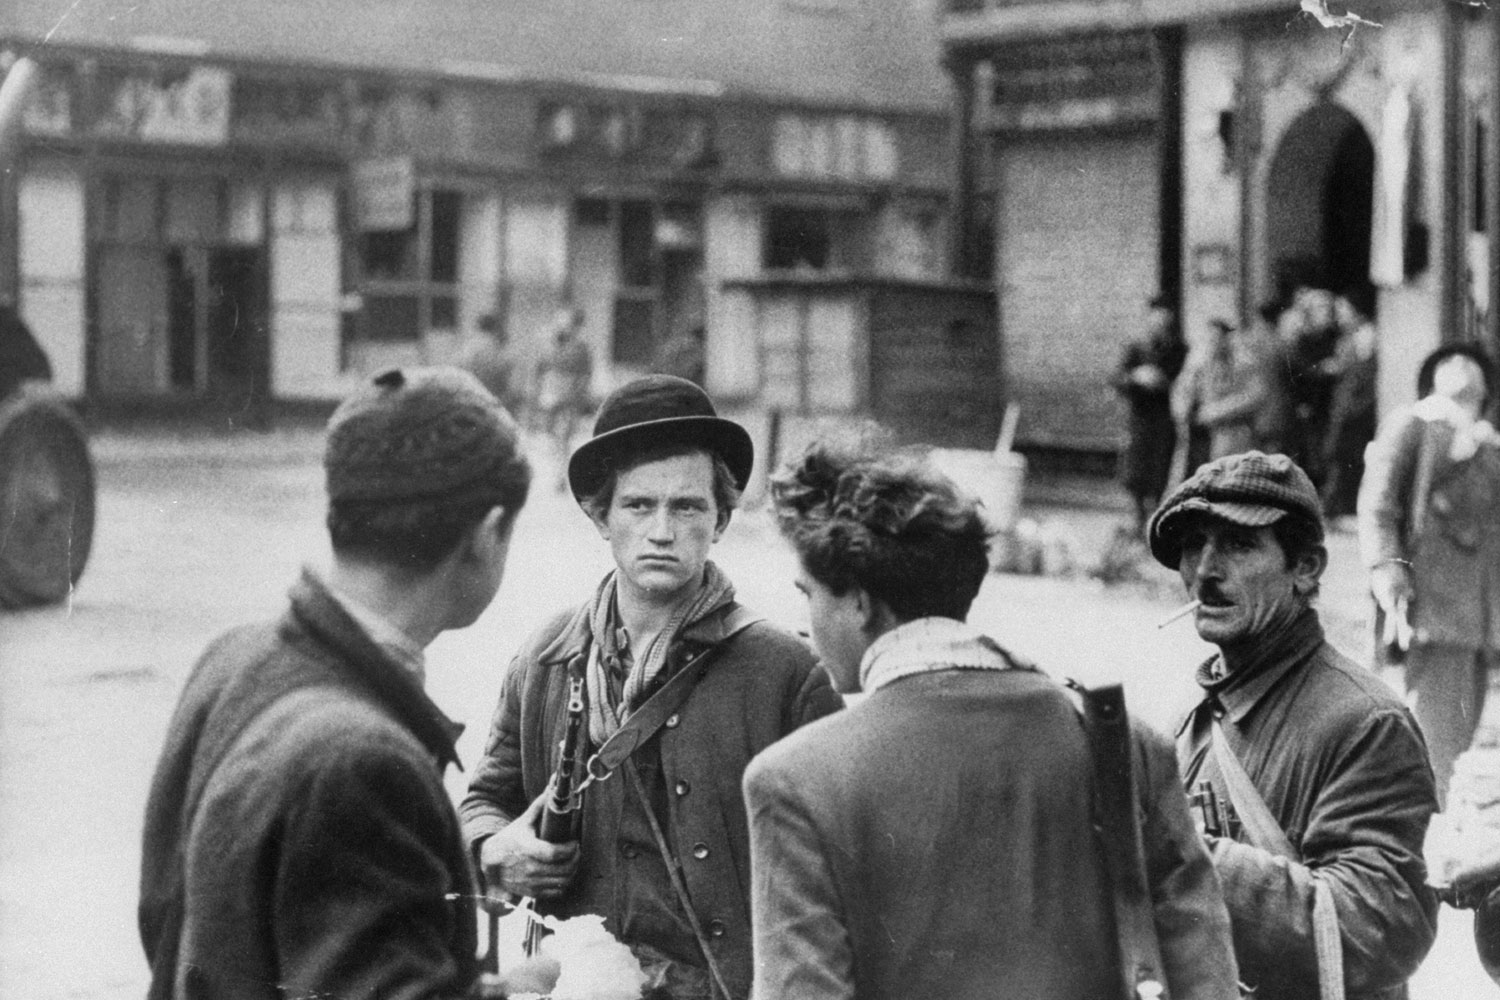 Hungarian rebel fighters, Budapest, 1956.